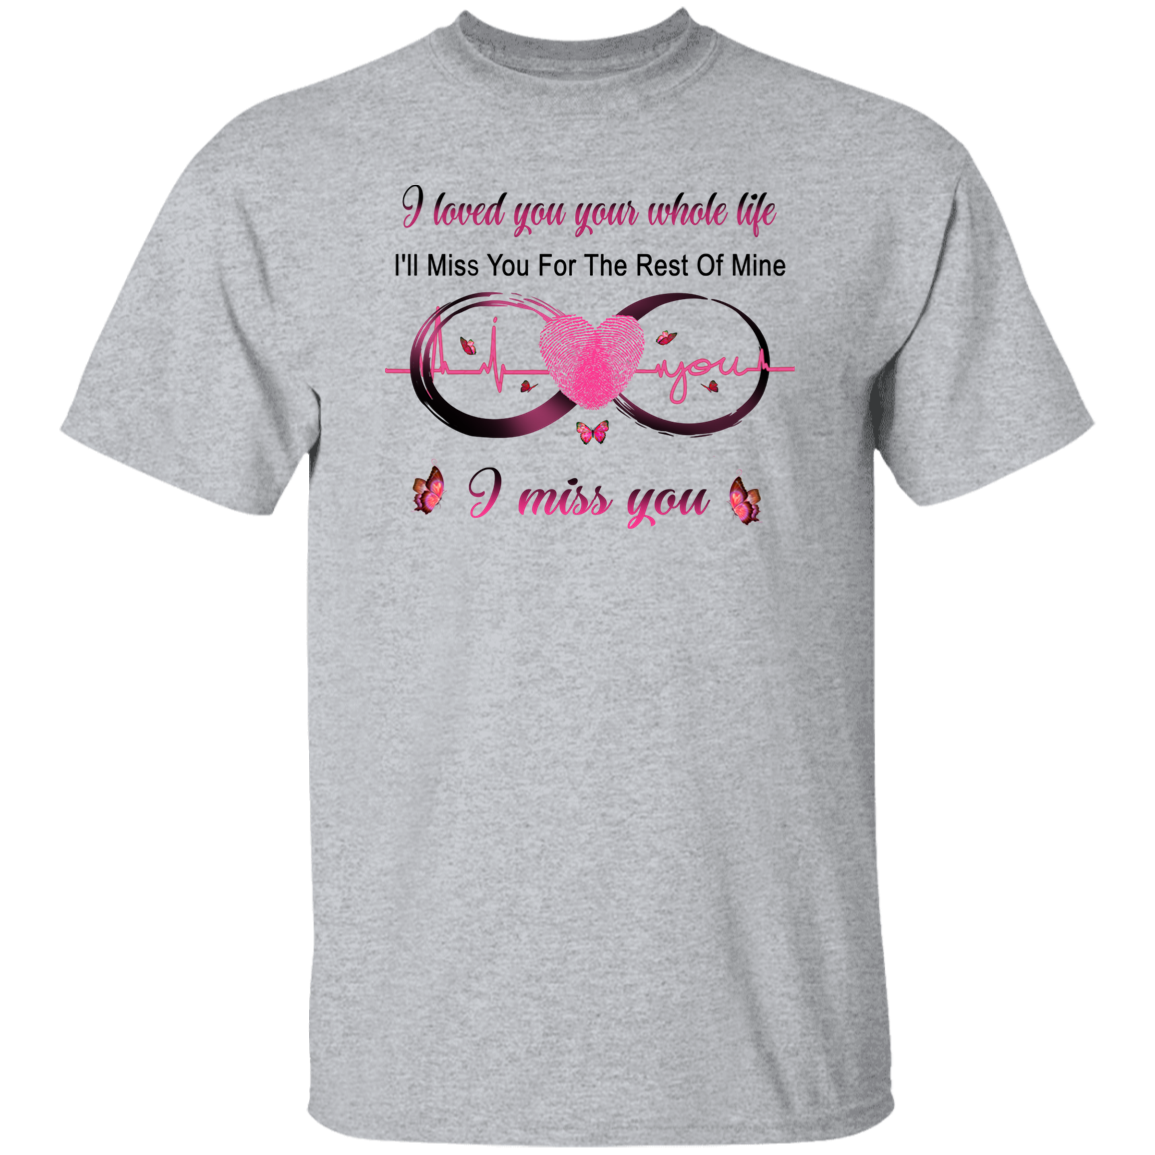 I Loved You Your Whole Life Memorial T-Shirt